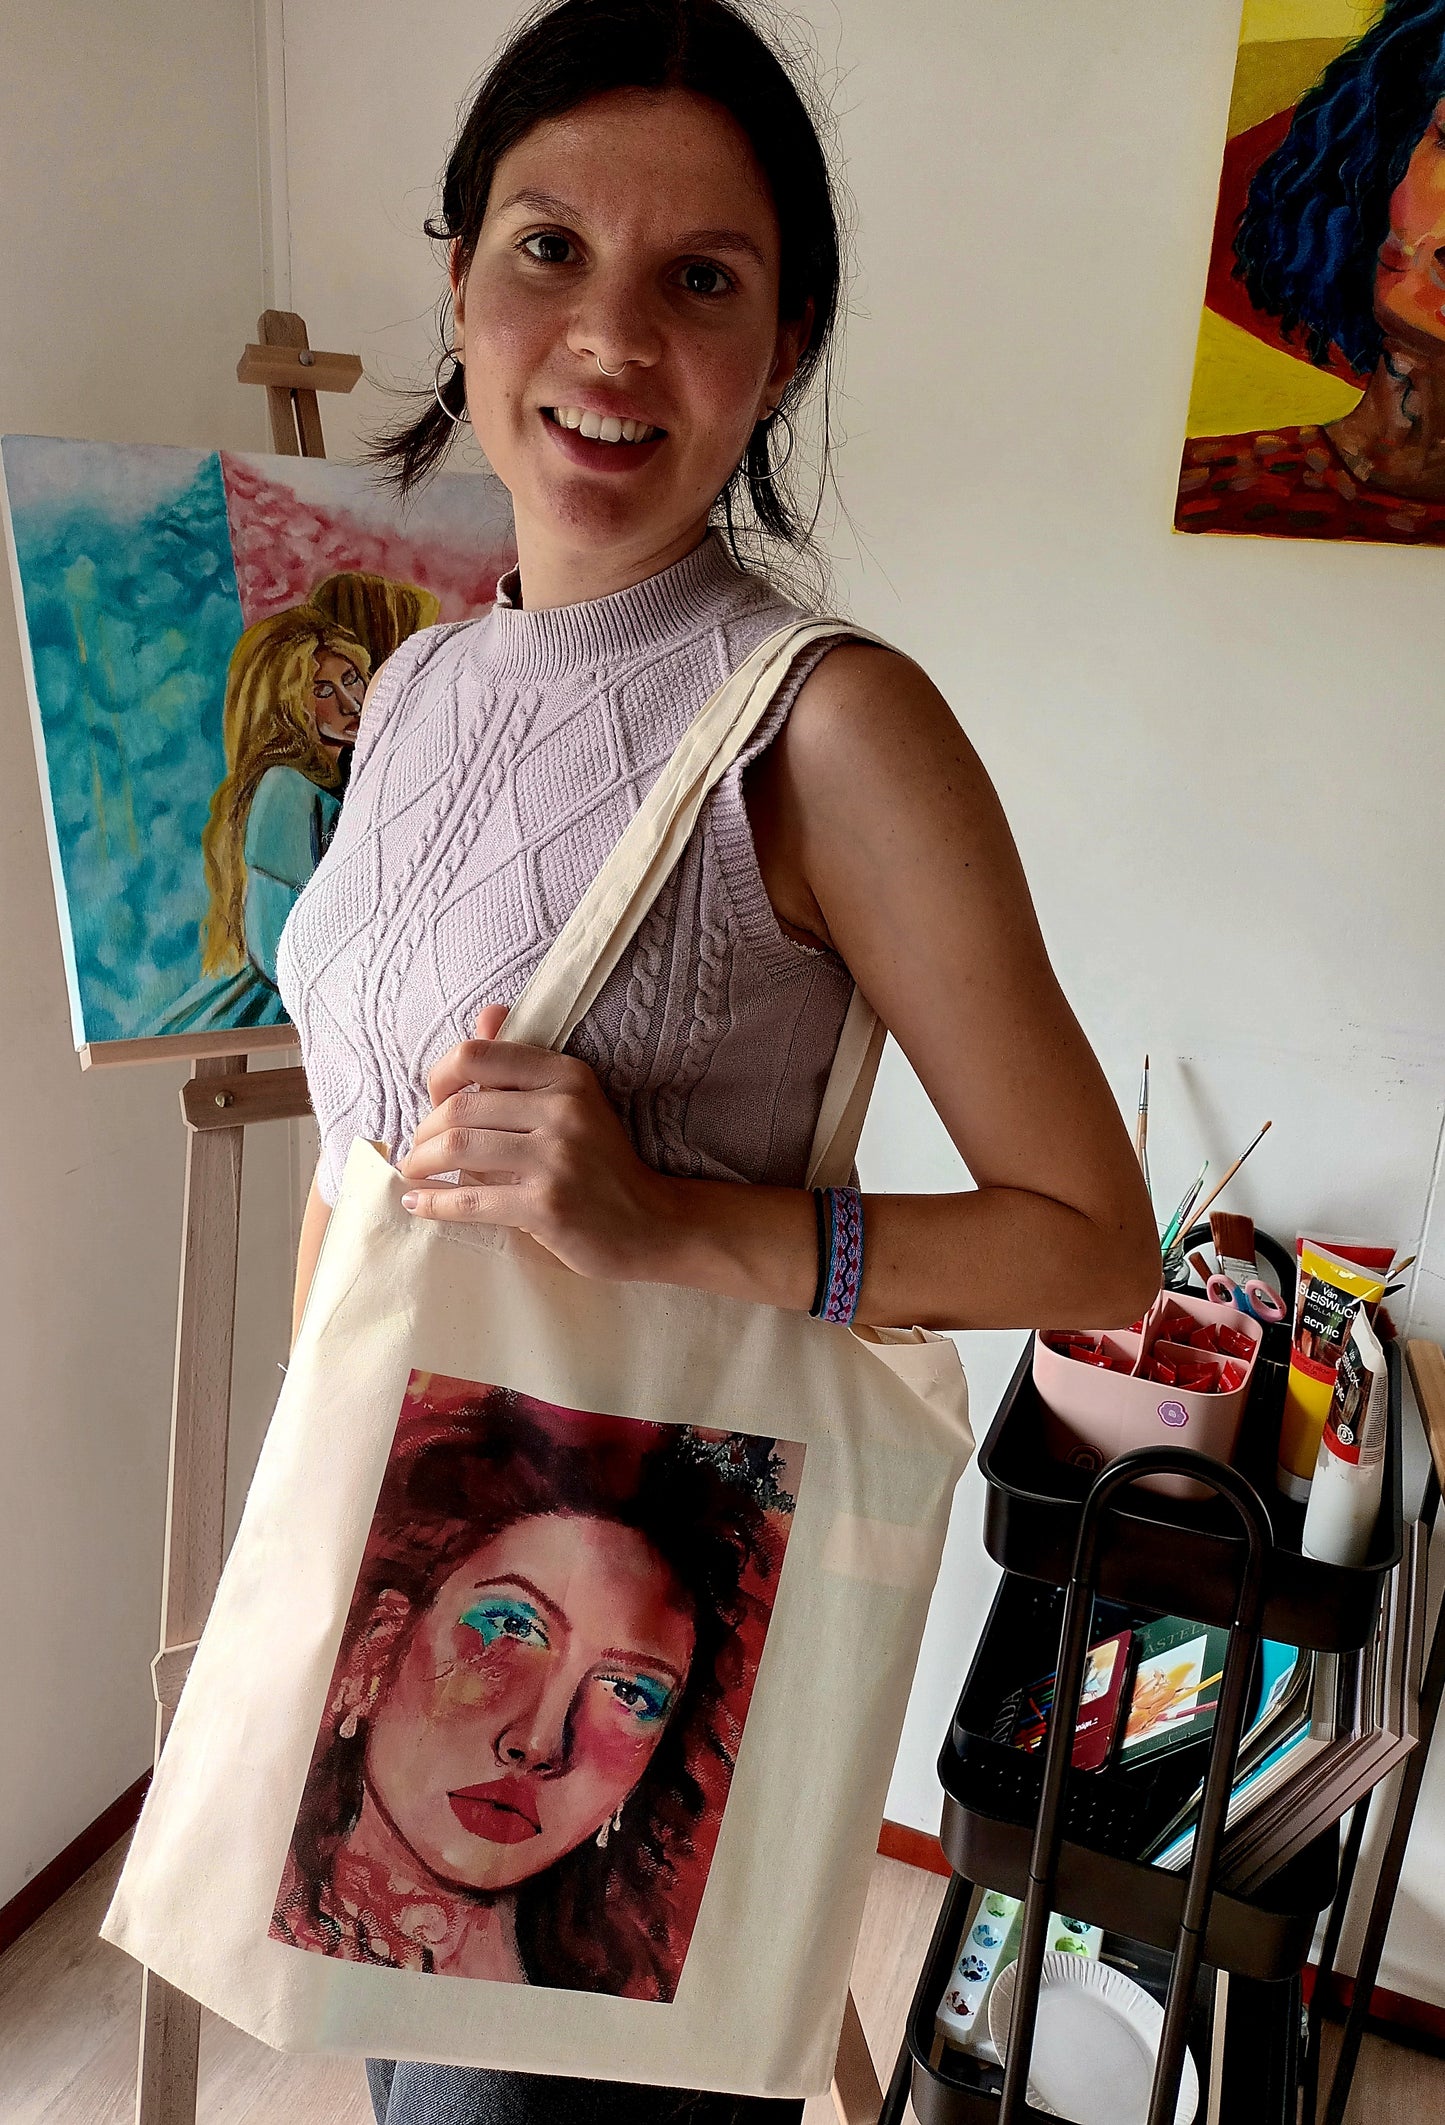 Tote bag with art design